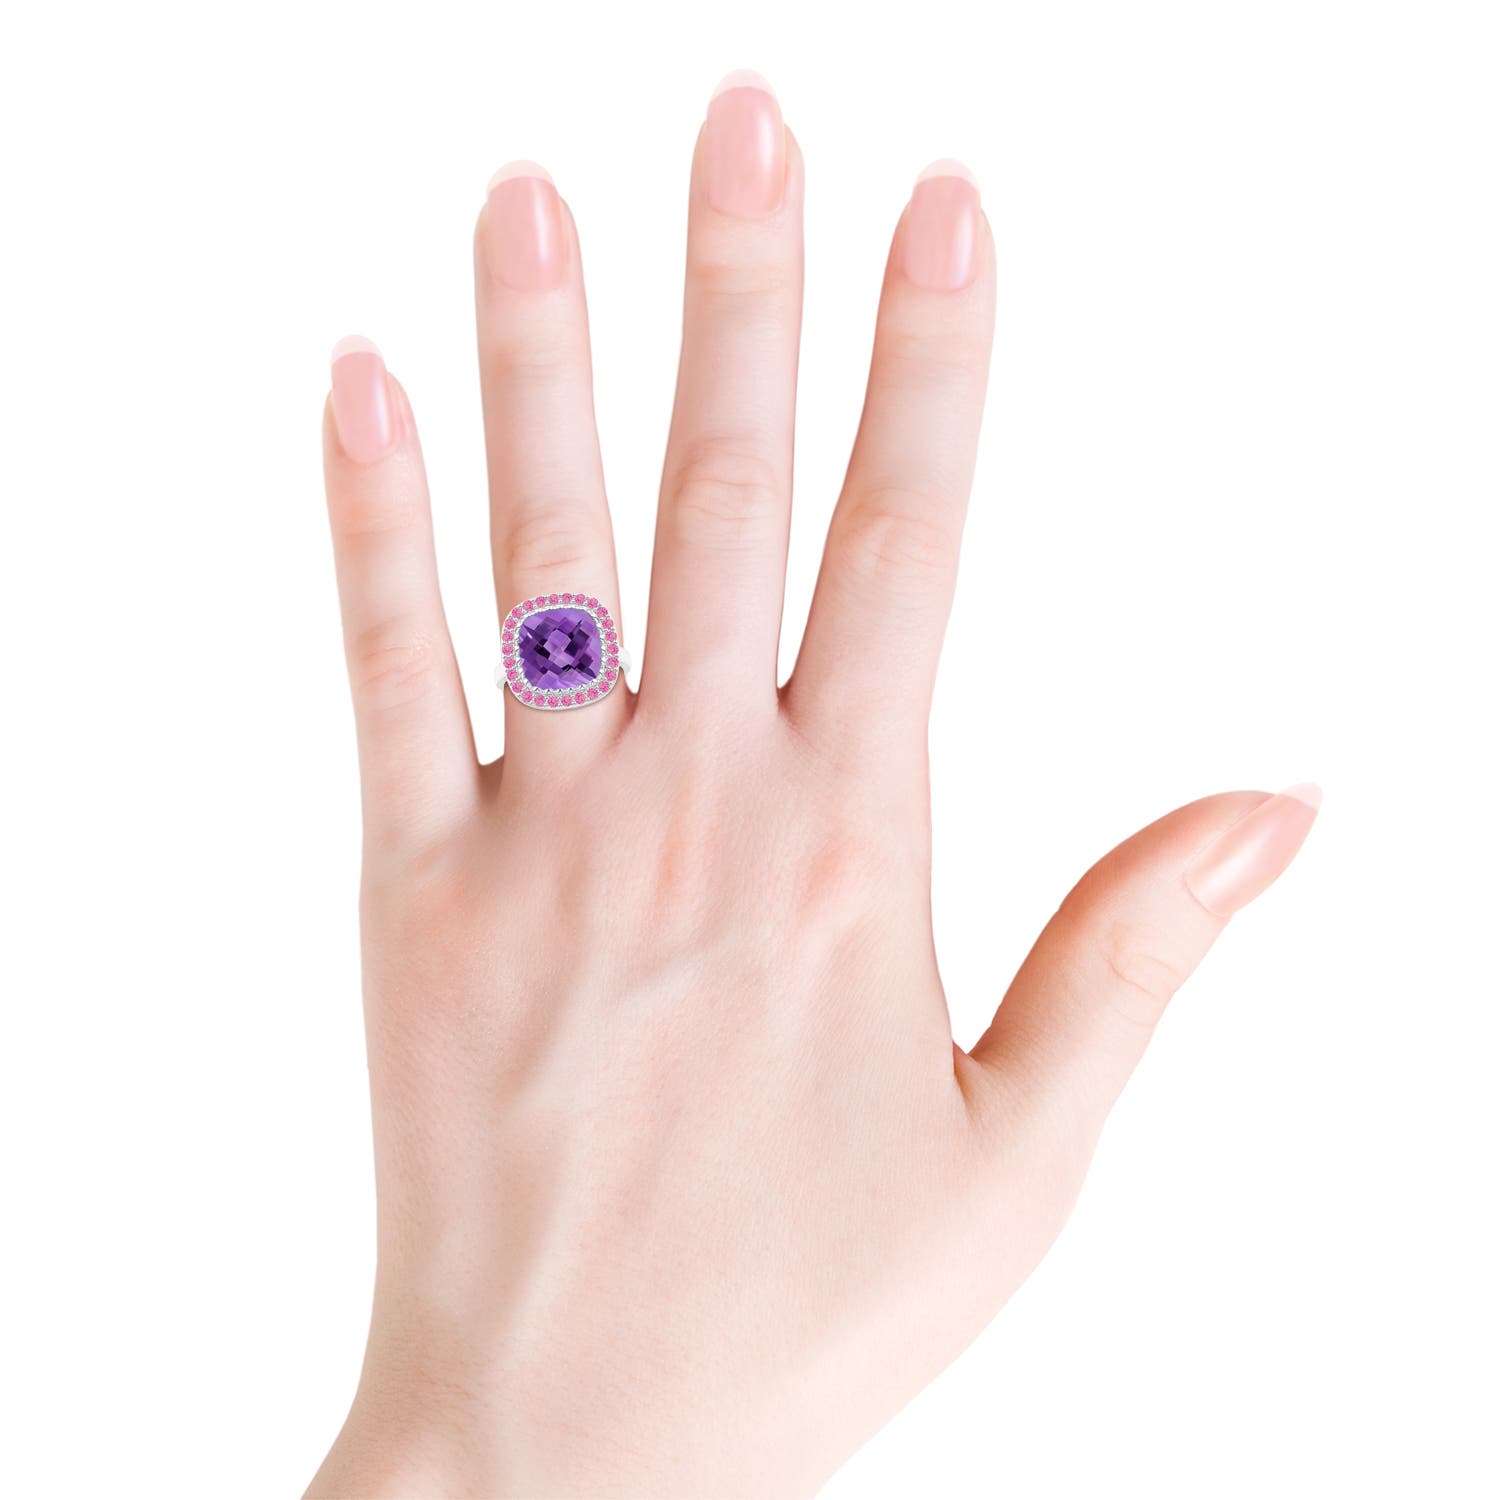 AA - Amethyst / 5.4 CT / 14 KT White Gold